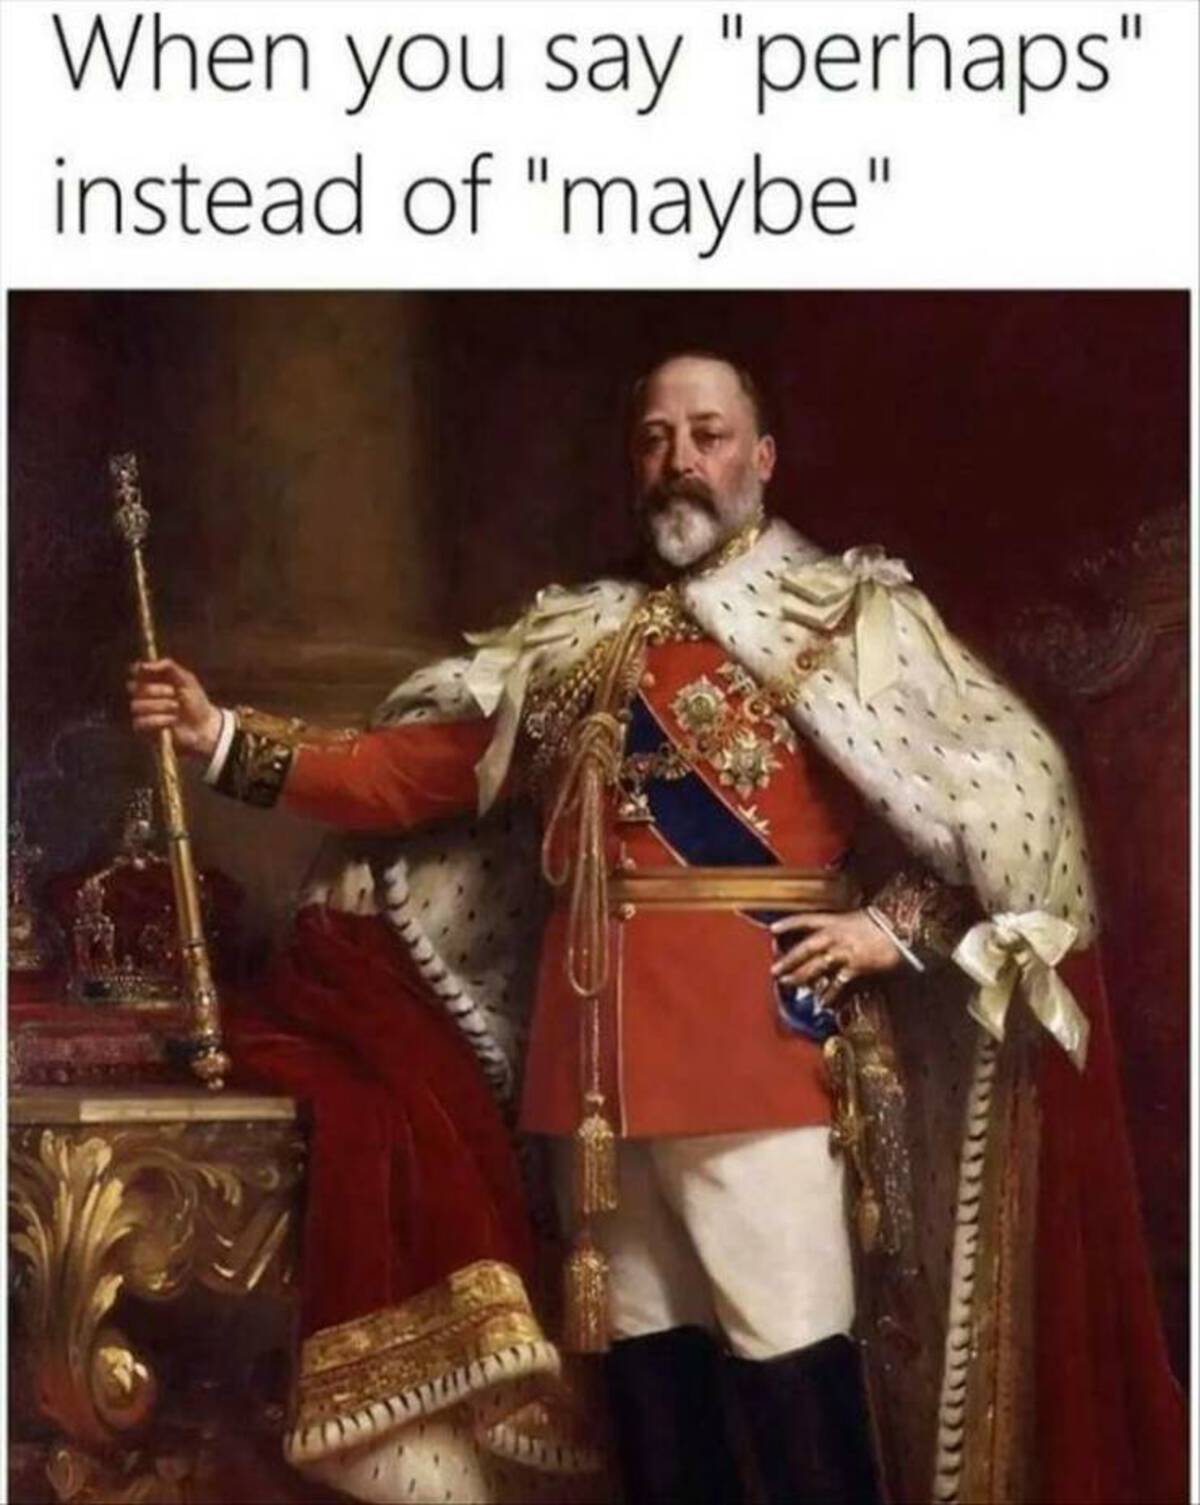 king painting - When you say "perhaps" instead of "maybe"